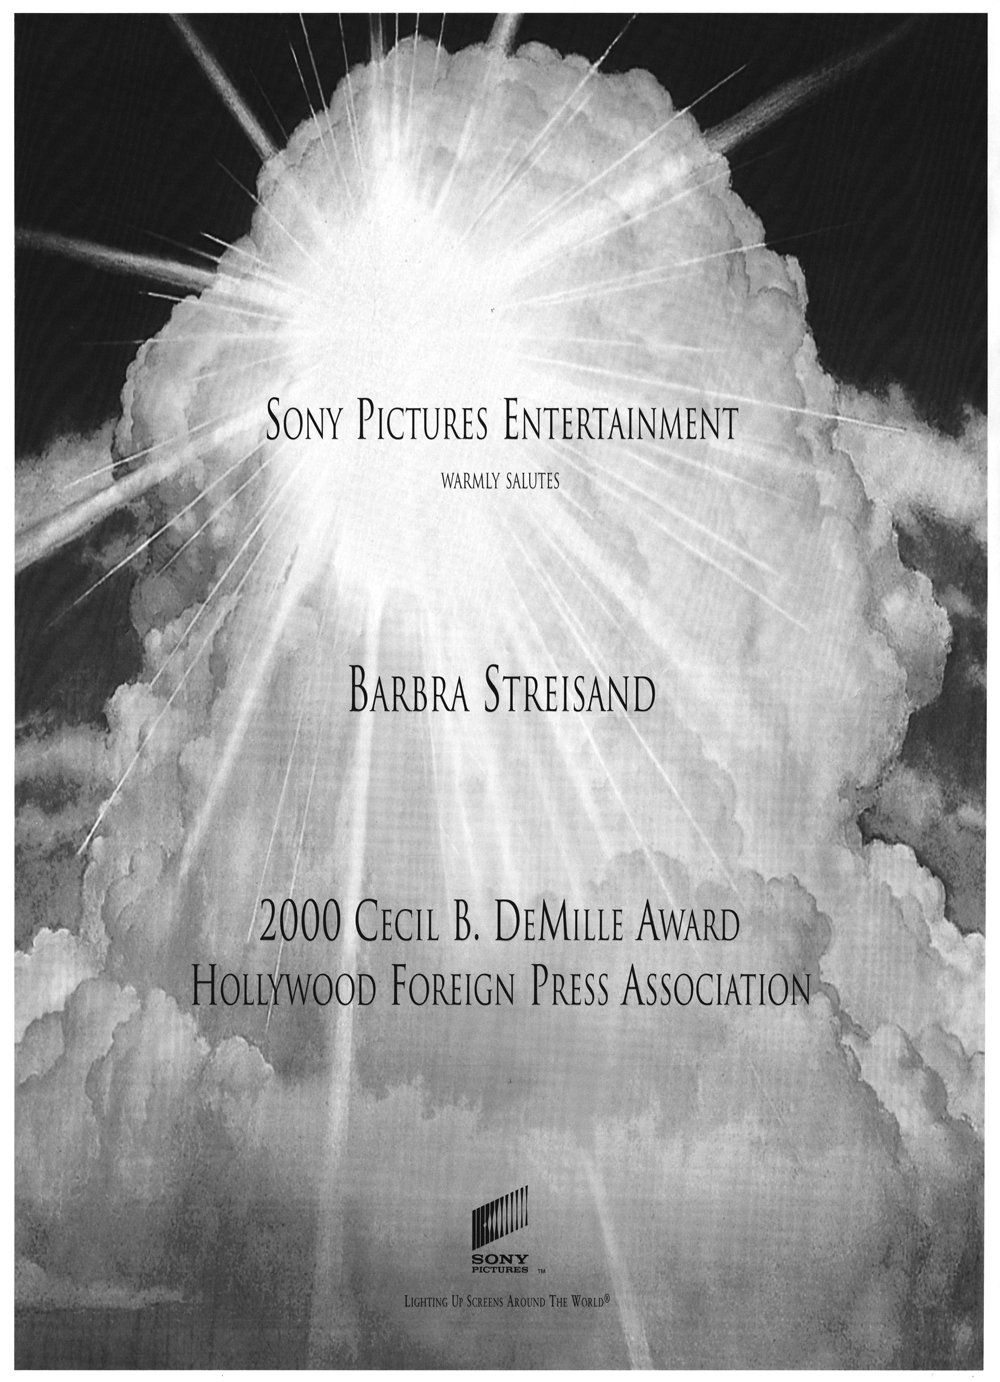 Sony Pictures congratulatory ad to Barbra for the Cecil B. DeMille Award.